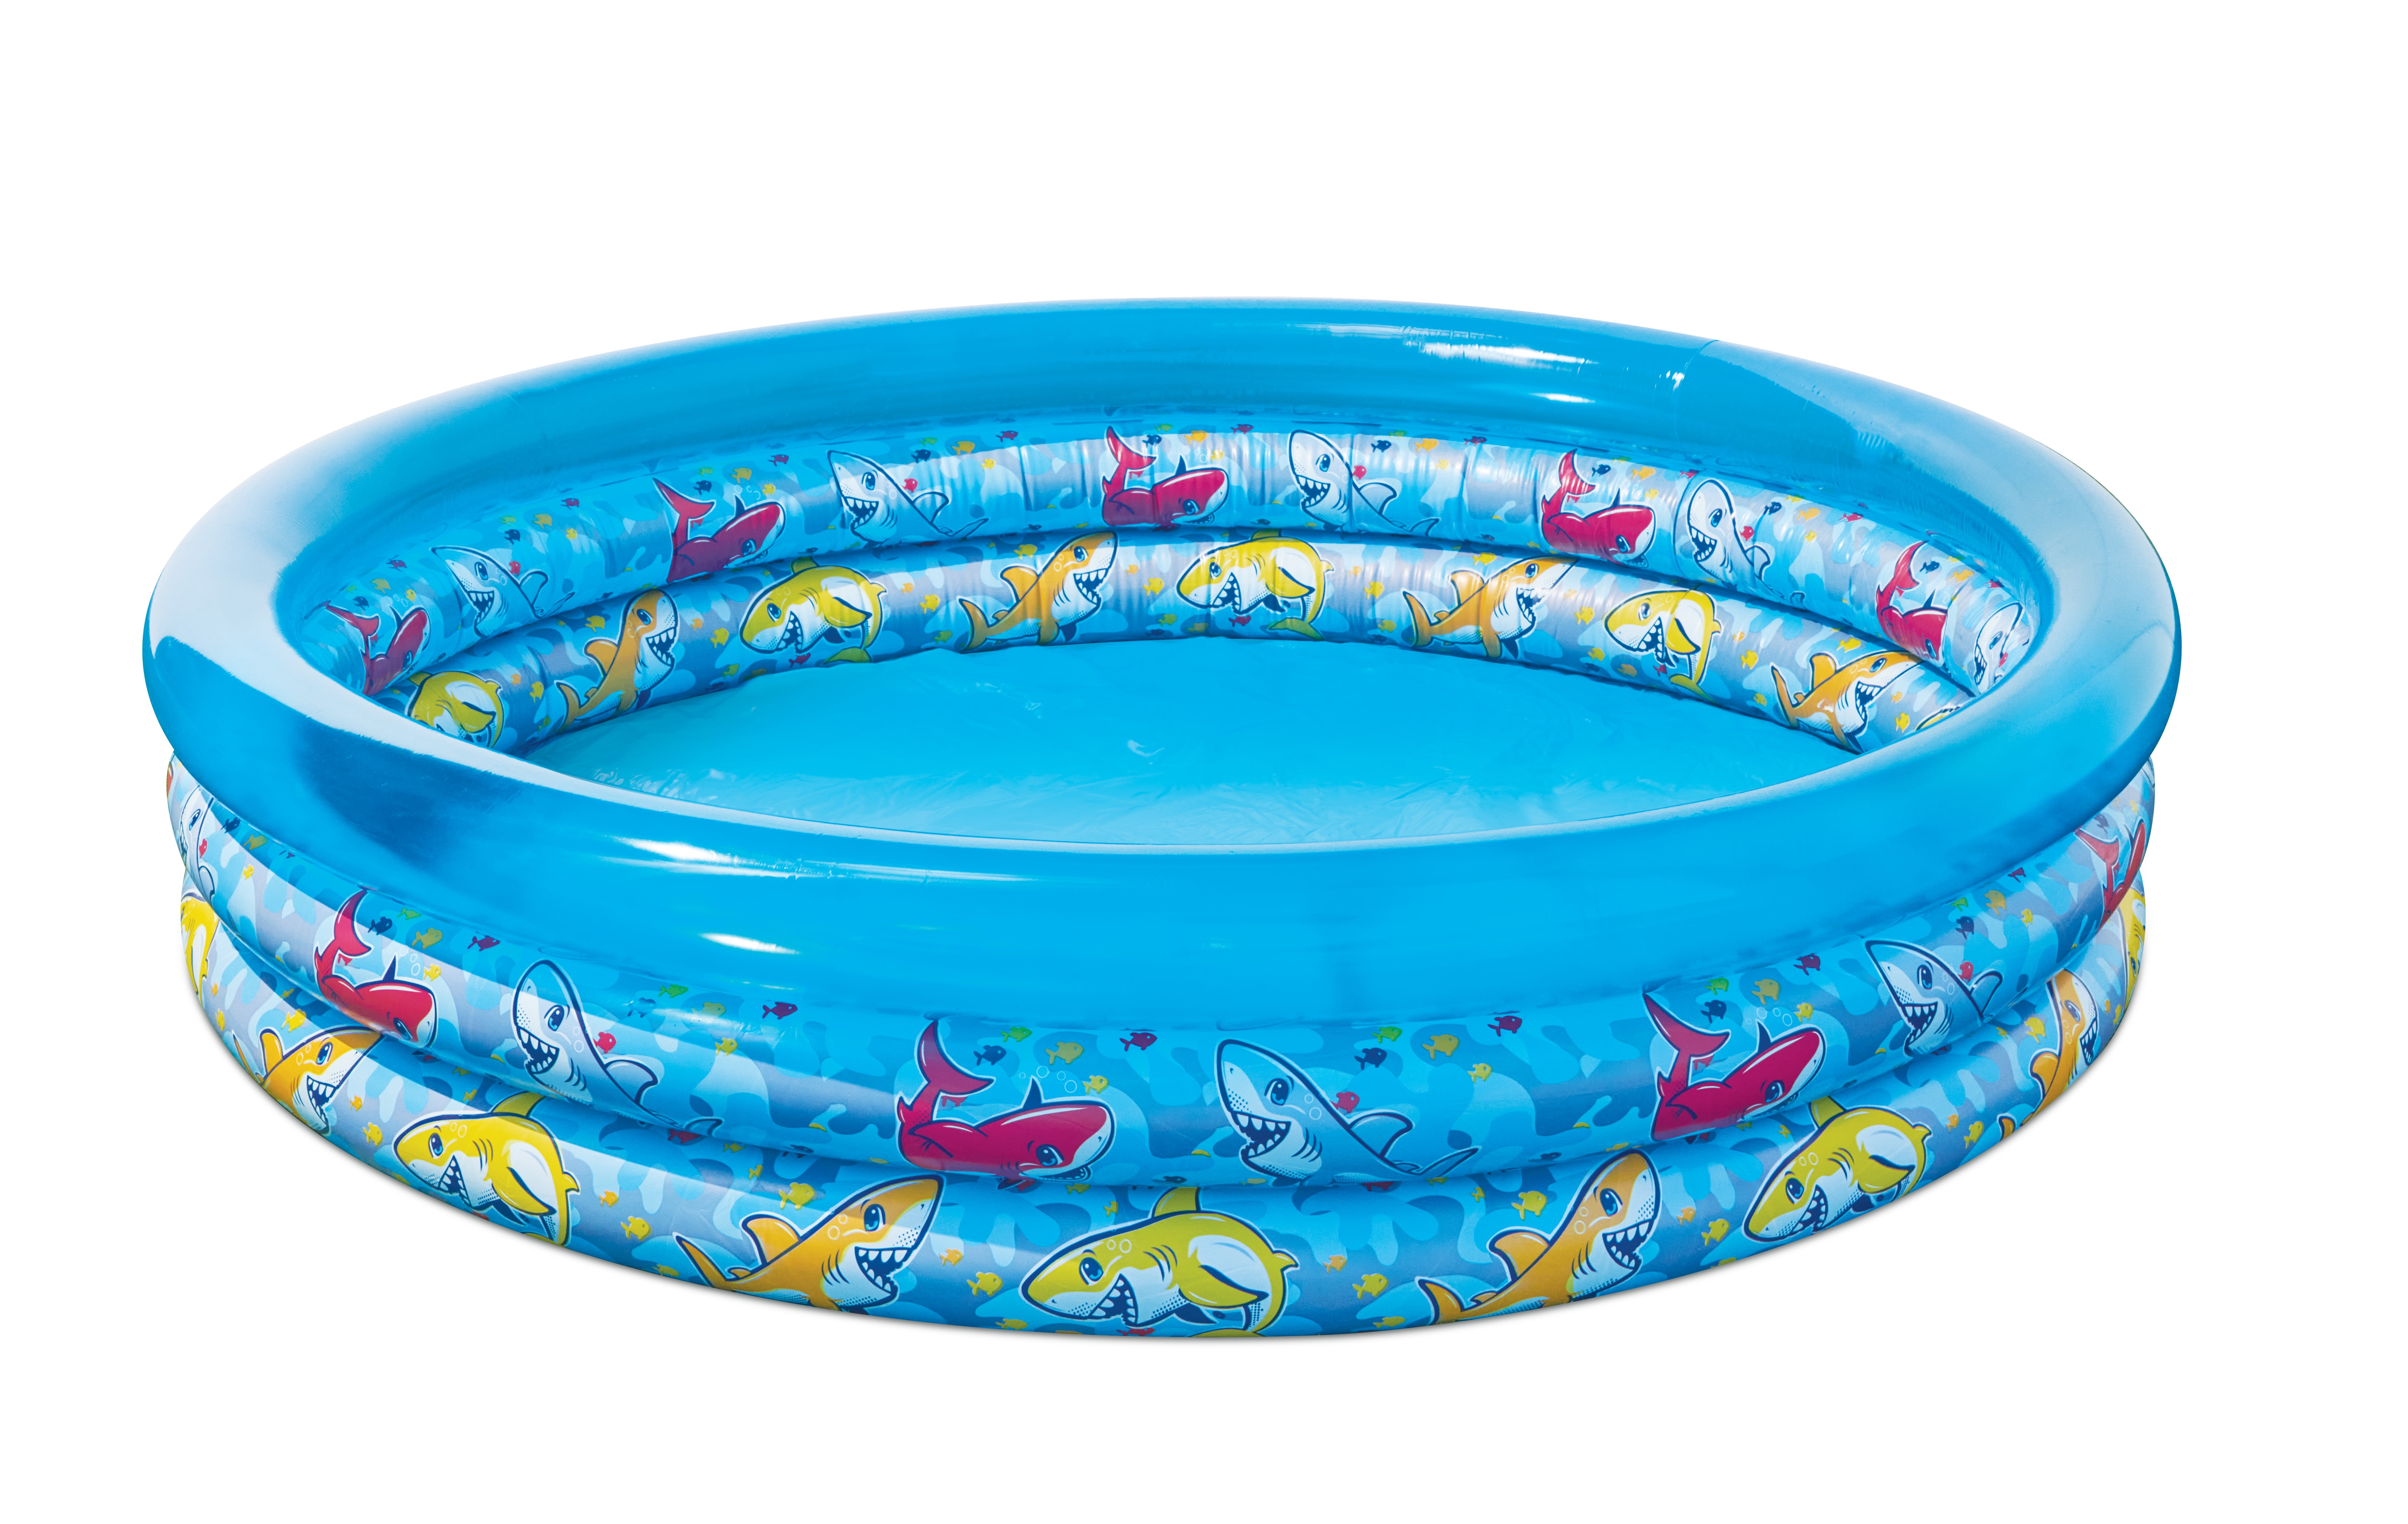 Kids Pool play Day Splash And Play 3 Ring Includes Repair Kit multicolored 